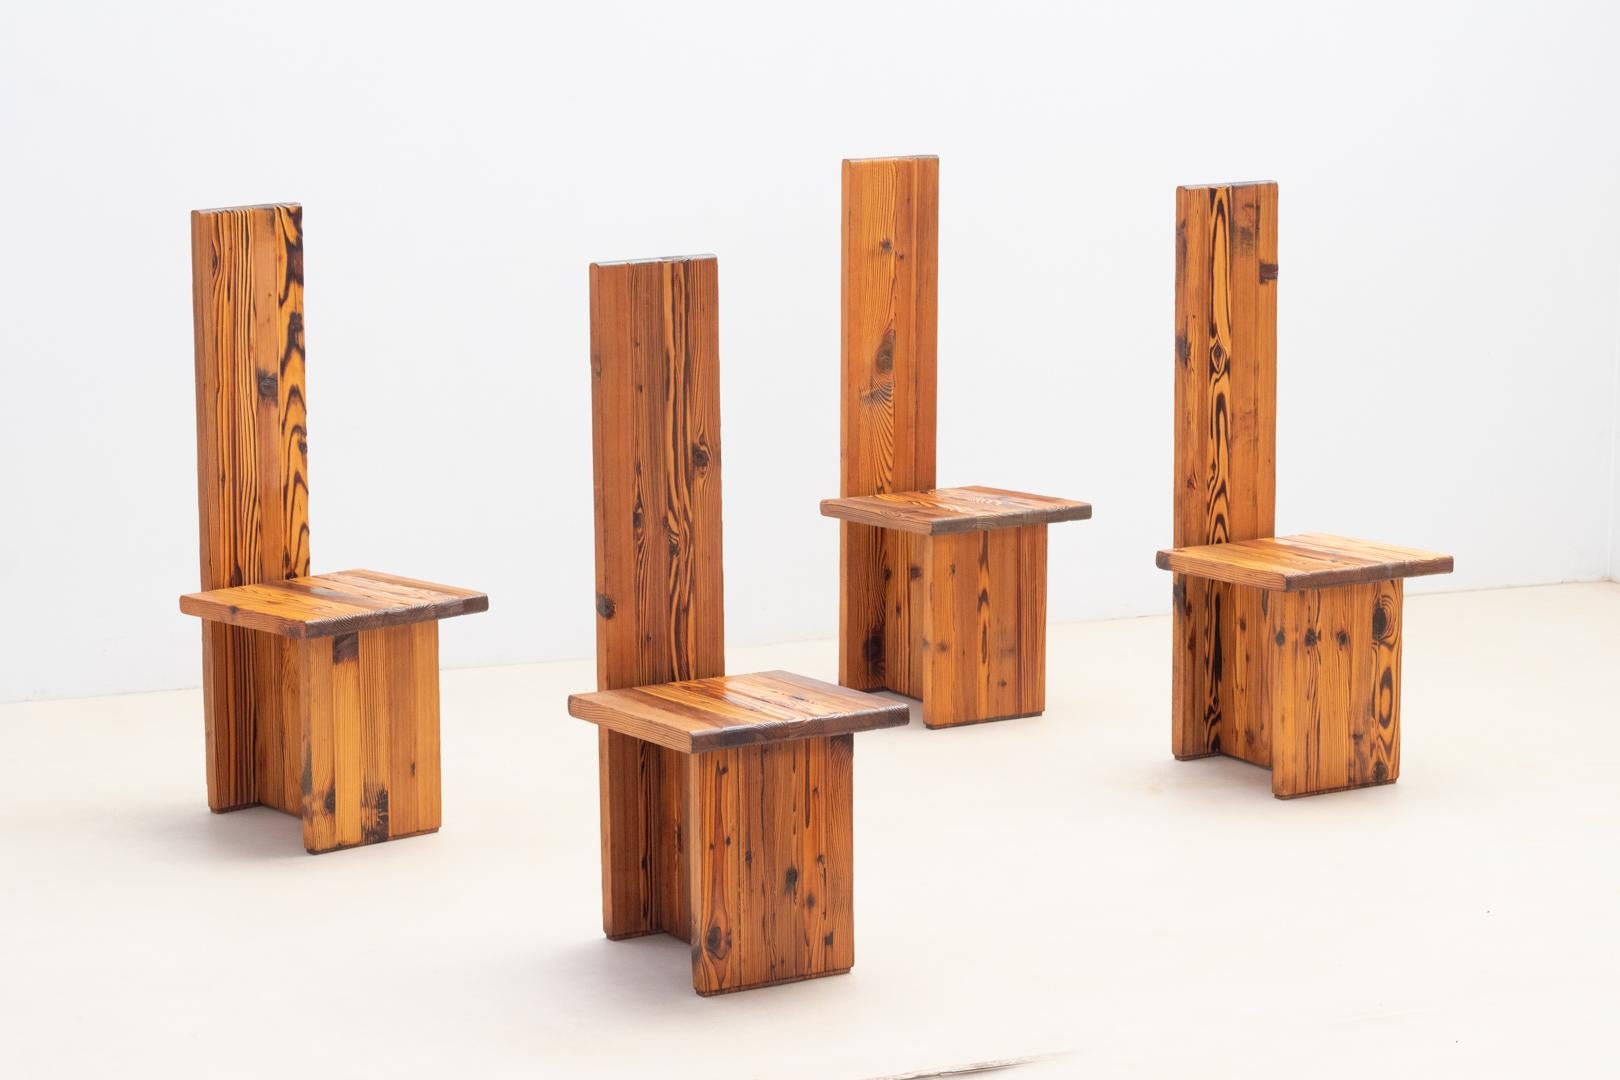 Set of four minimalist chairs with architectural lines and burnt pine finish in the spirit of Japanese Shou Sugi Ban technique.
The set with clean lines, a kind of regressive lines, features a high backrest that recalls the regal height of thrones.